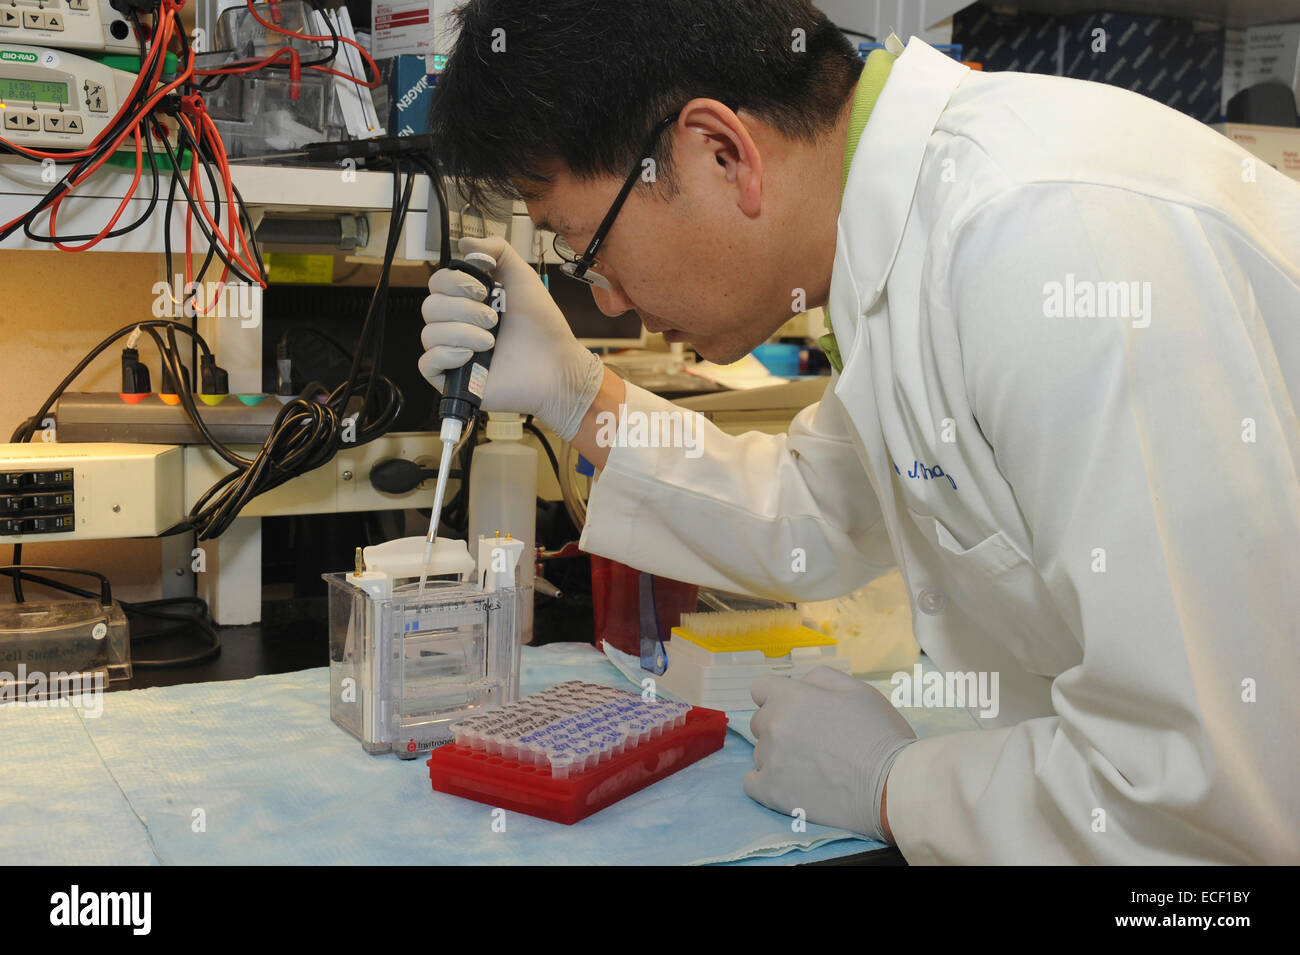 Scientist prepares a Western blot, a technique used to detect a specific protein in a blood or tissue sample. Stock Photo